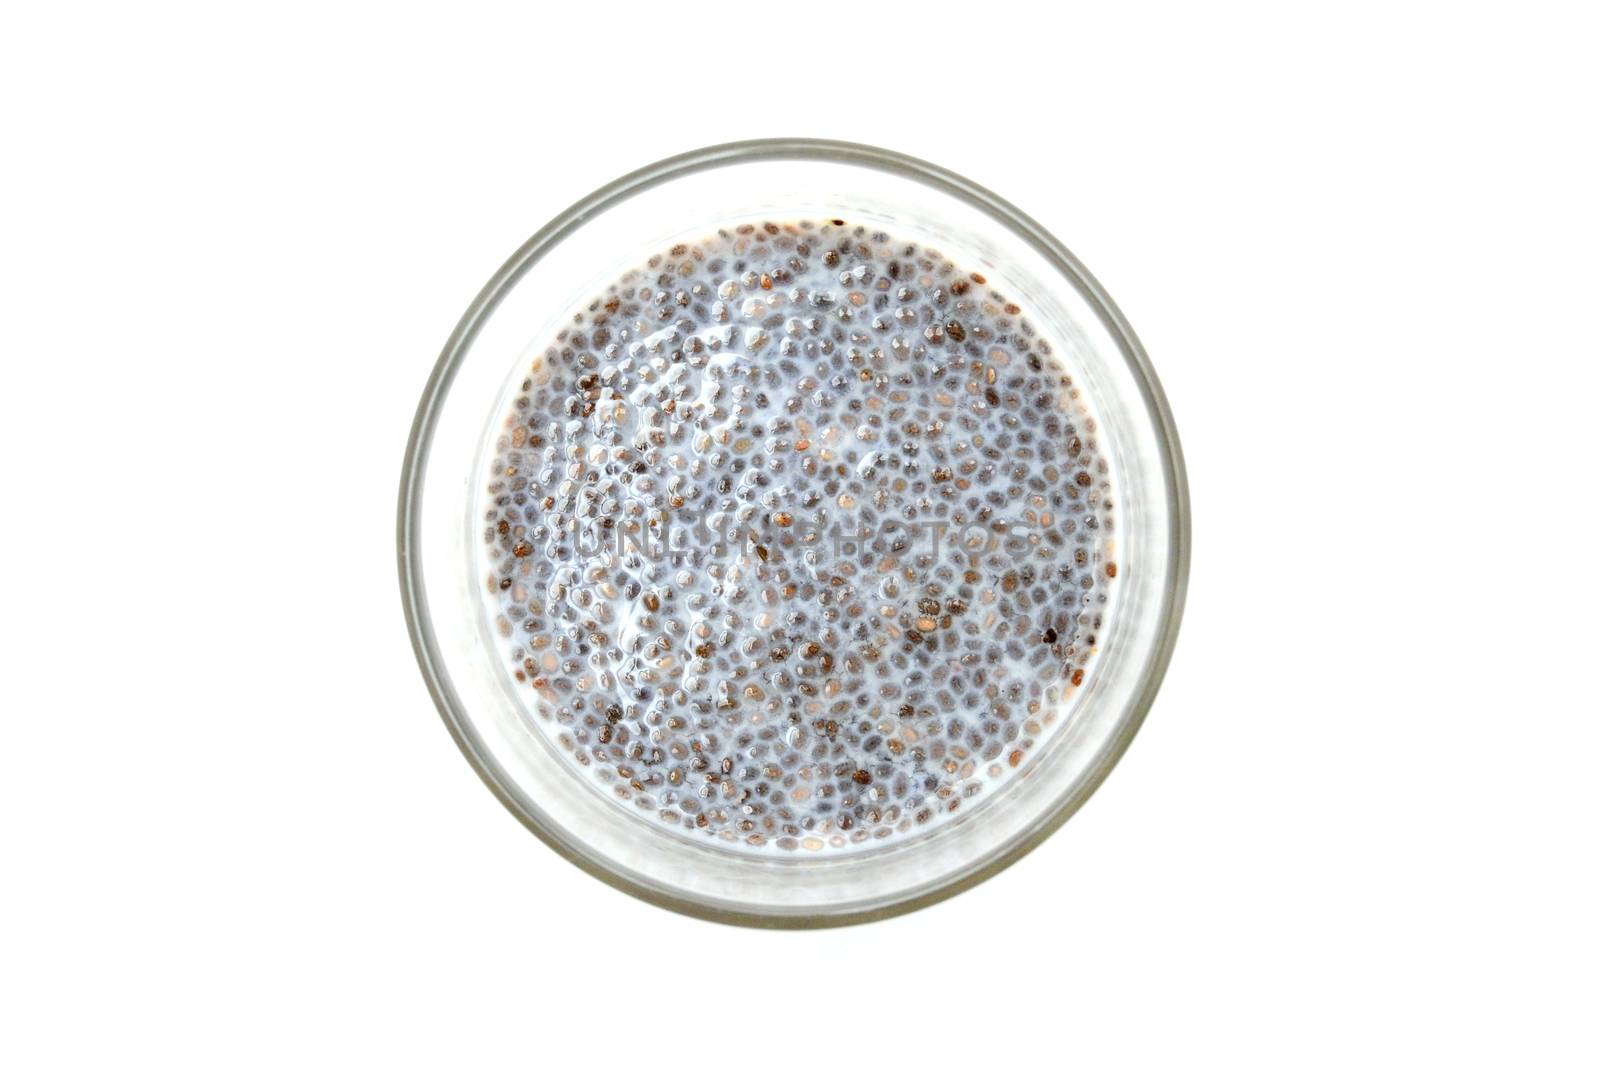 Chia Pudding glass over white background top view